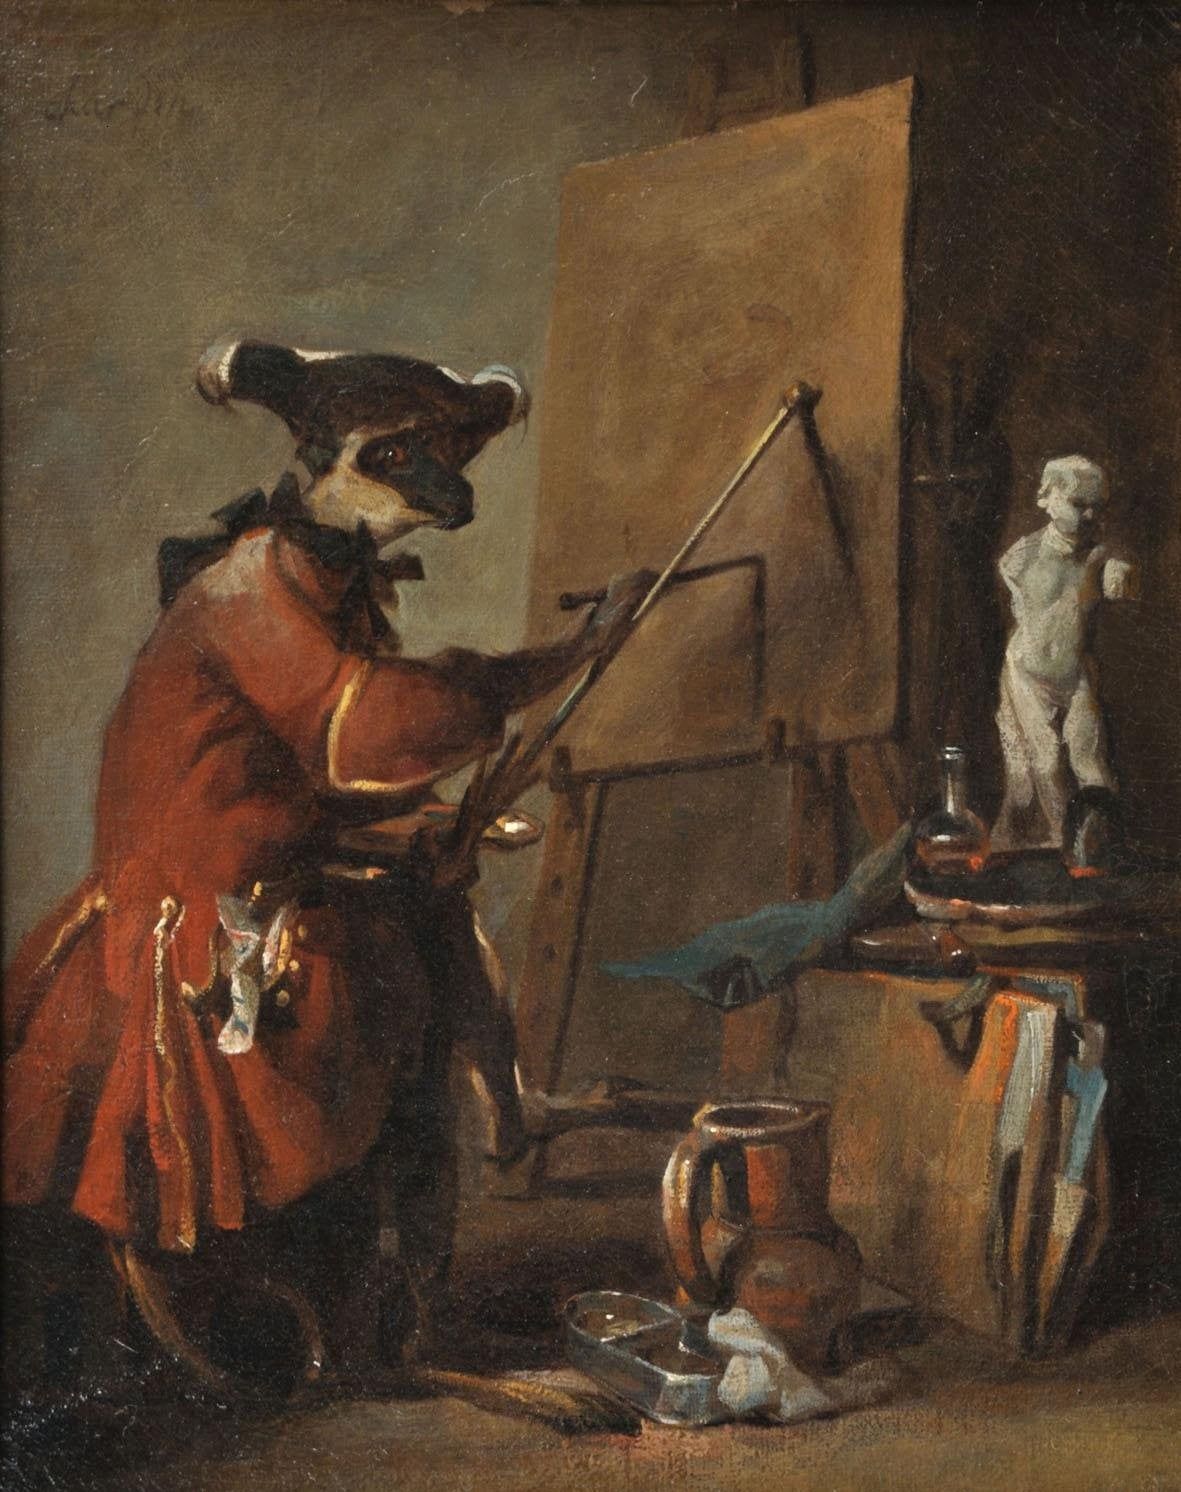 Painting of a monkey painting on an easel. 